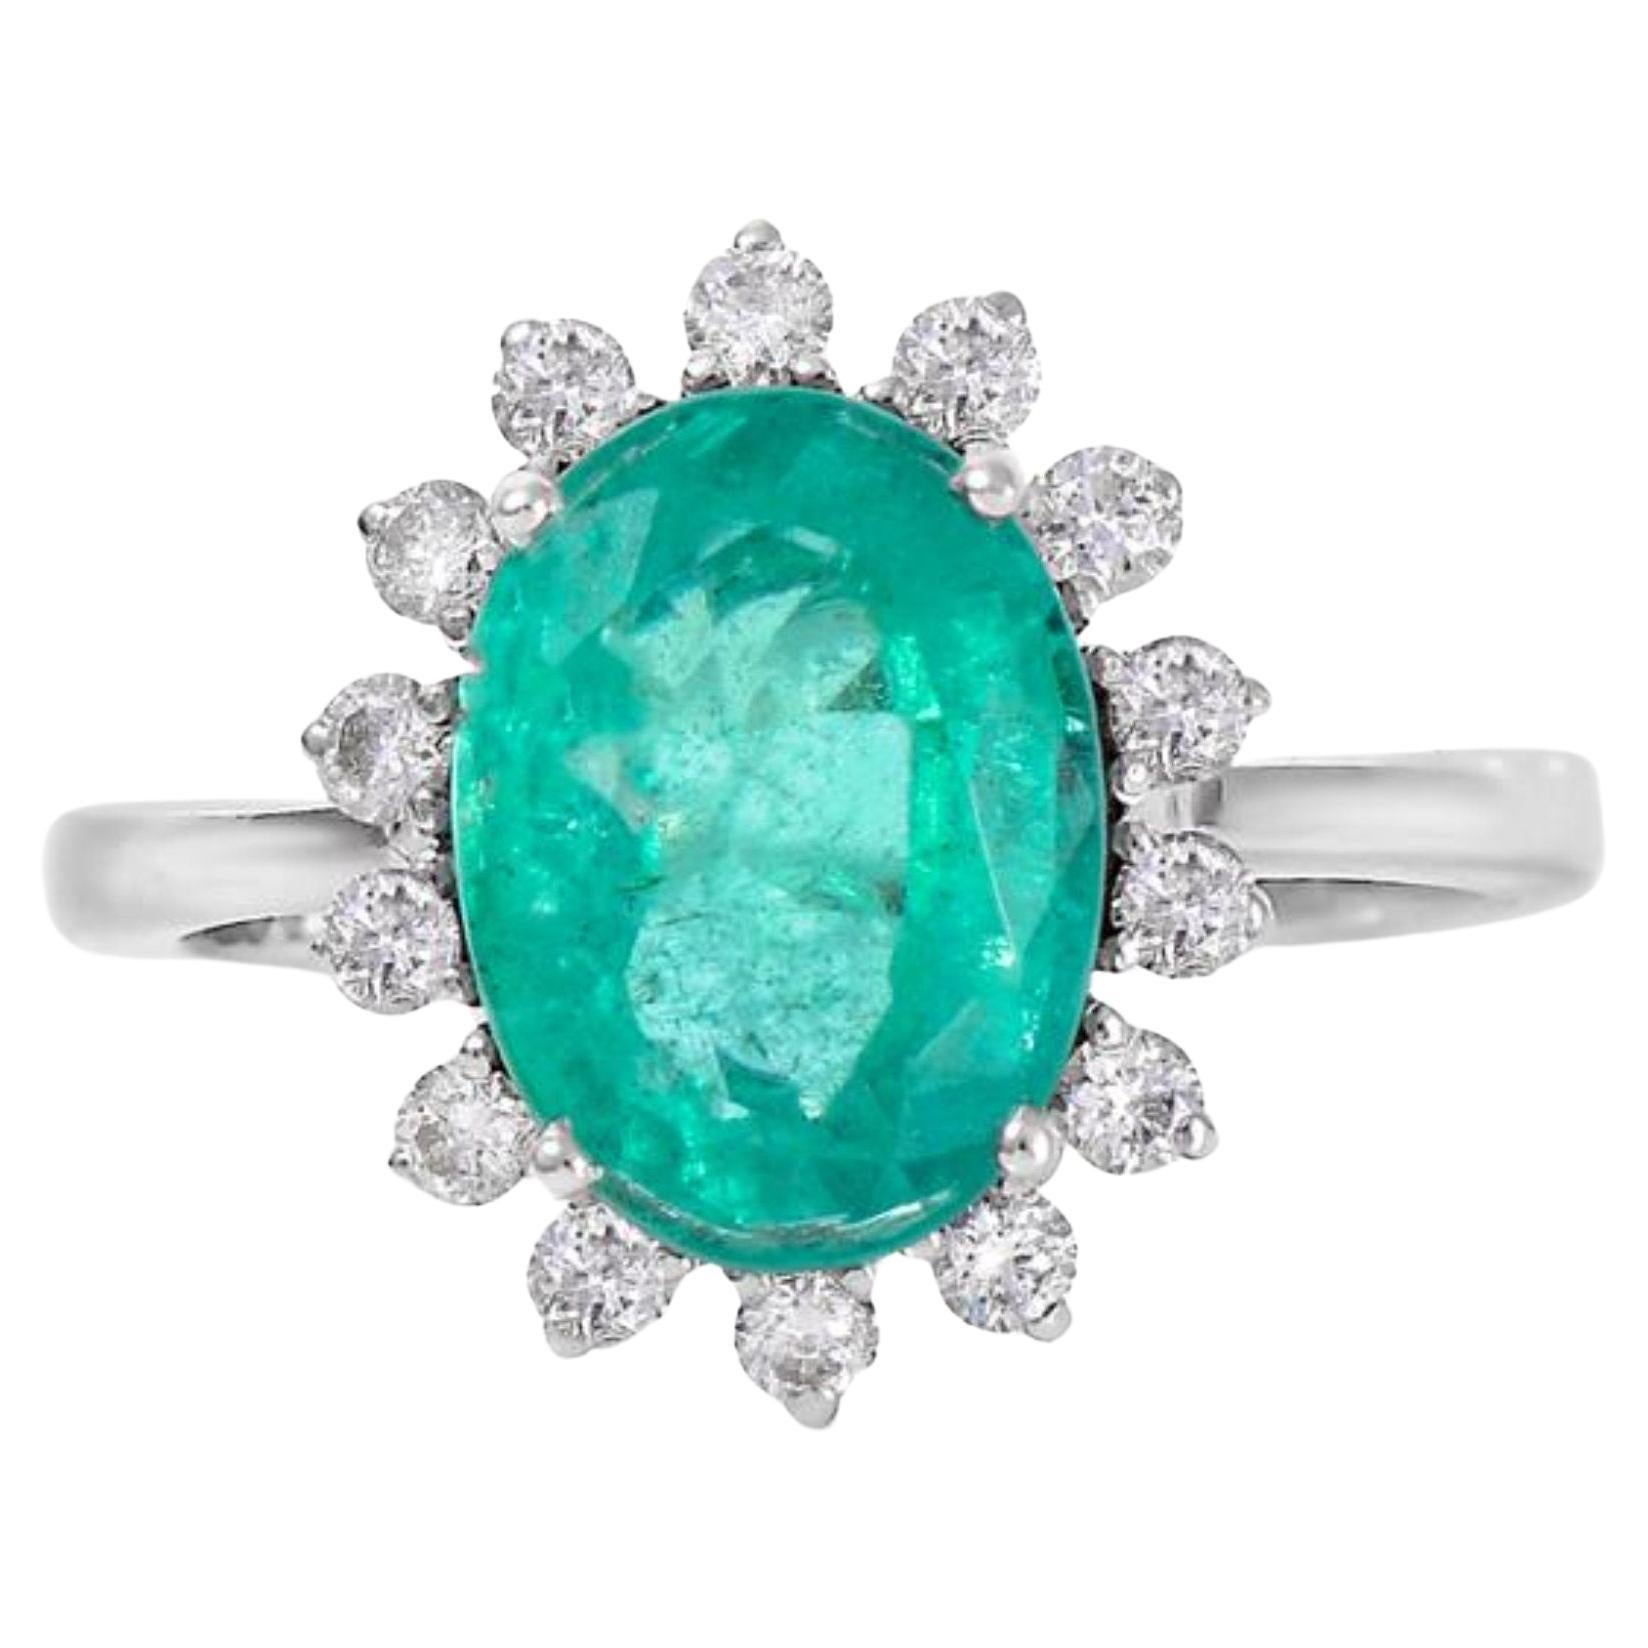 For Sale:  White Gold 3 Carat Emerald Engagement Ring, Unique Emerald Diamond Wedding Ring